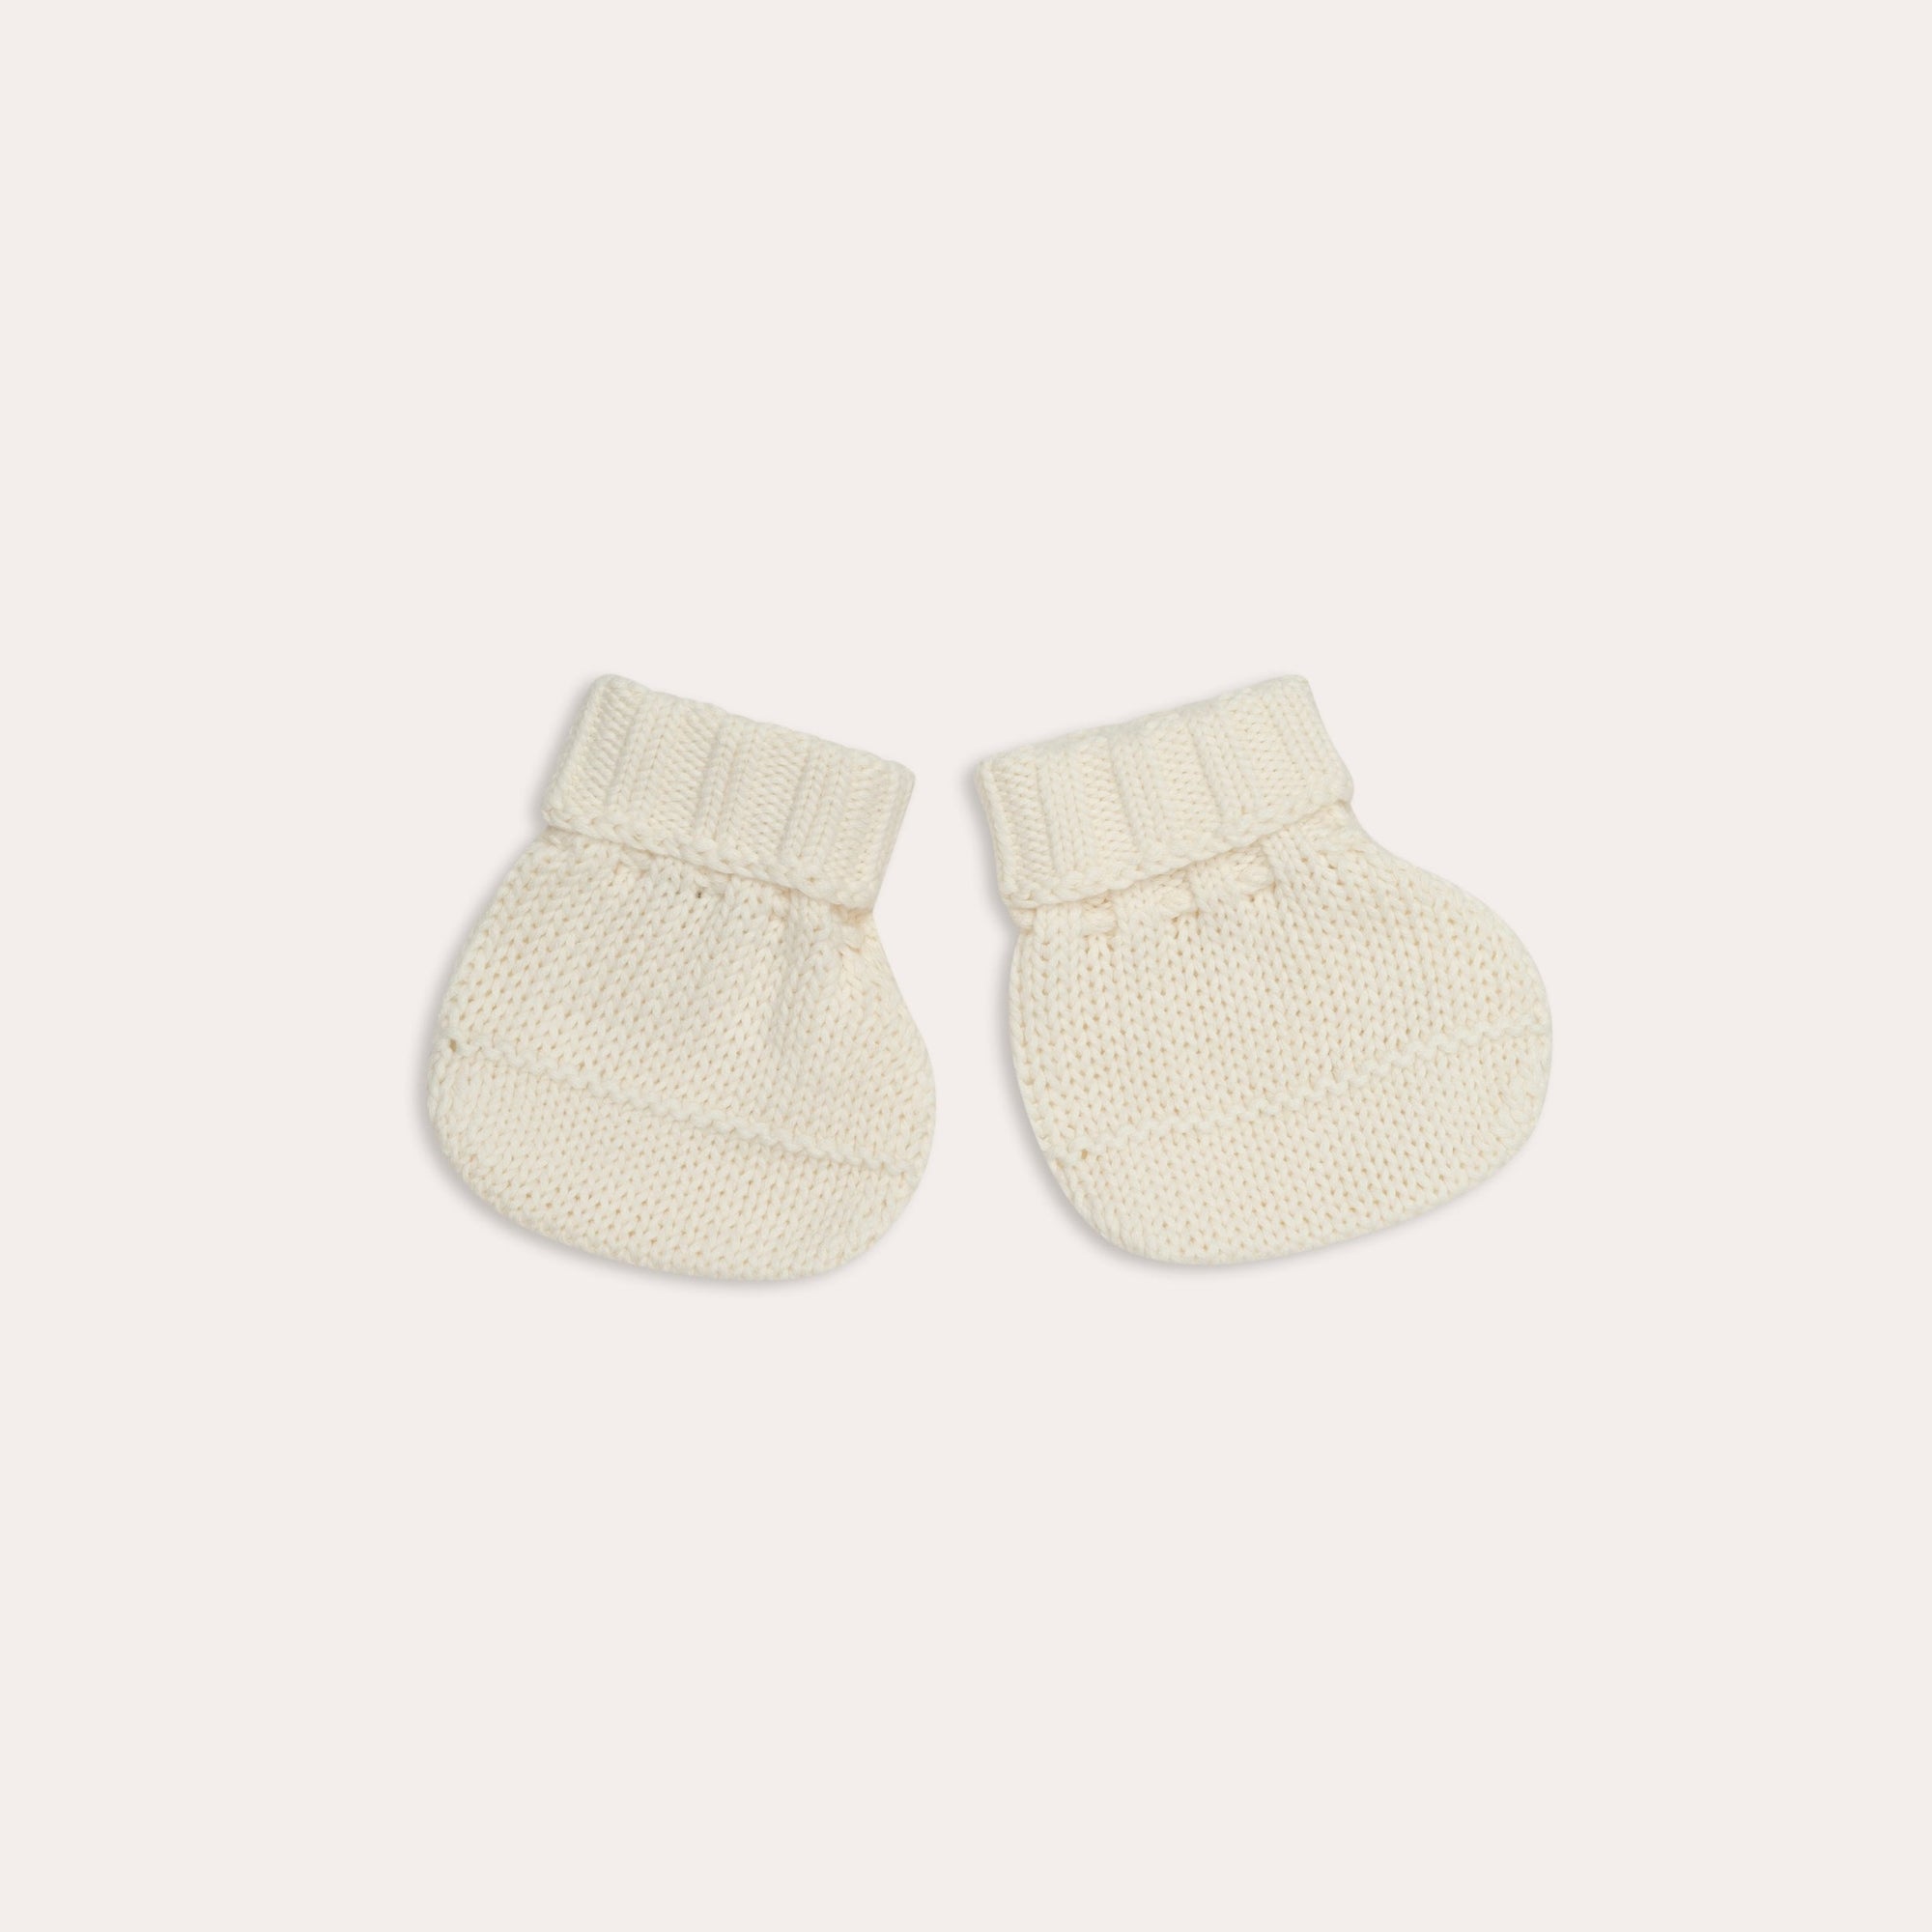 A pair of Illoura knitted alba booties in vanilla color on a white background. (Brand: Illoura the Label)